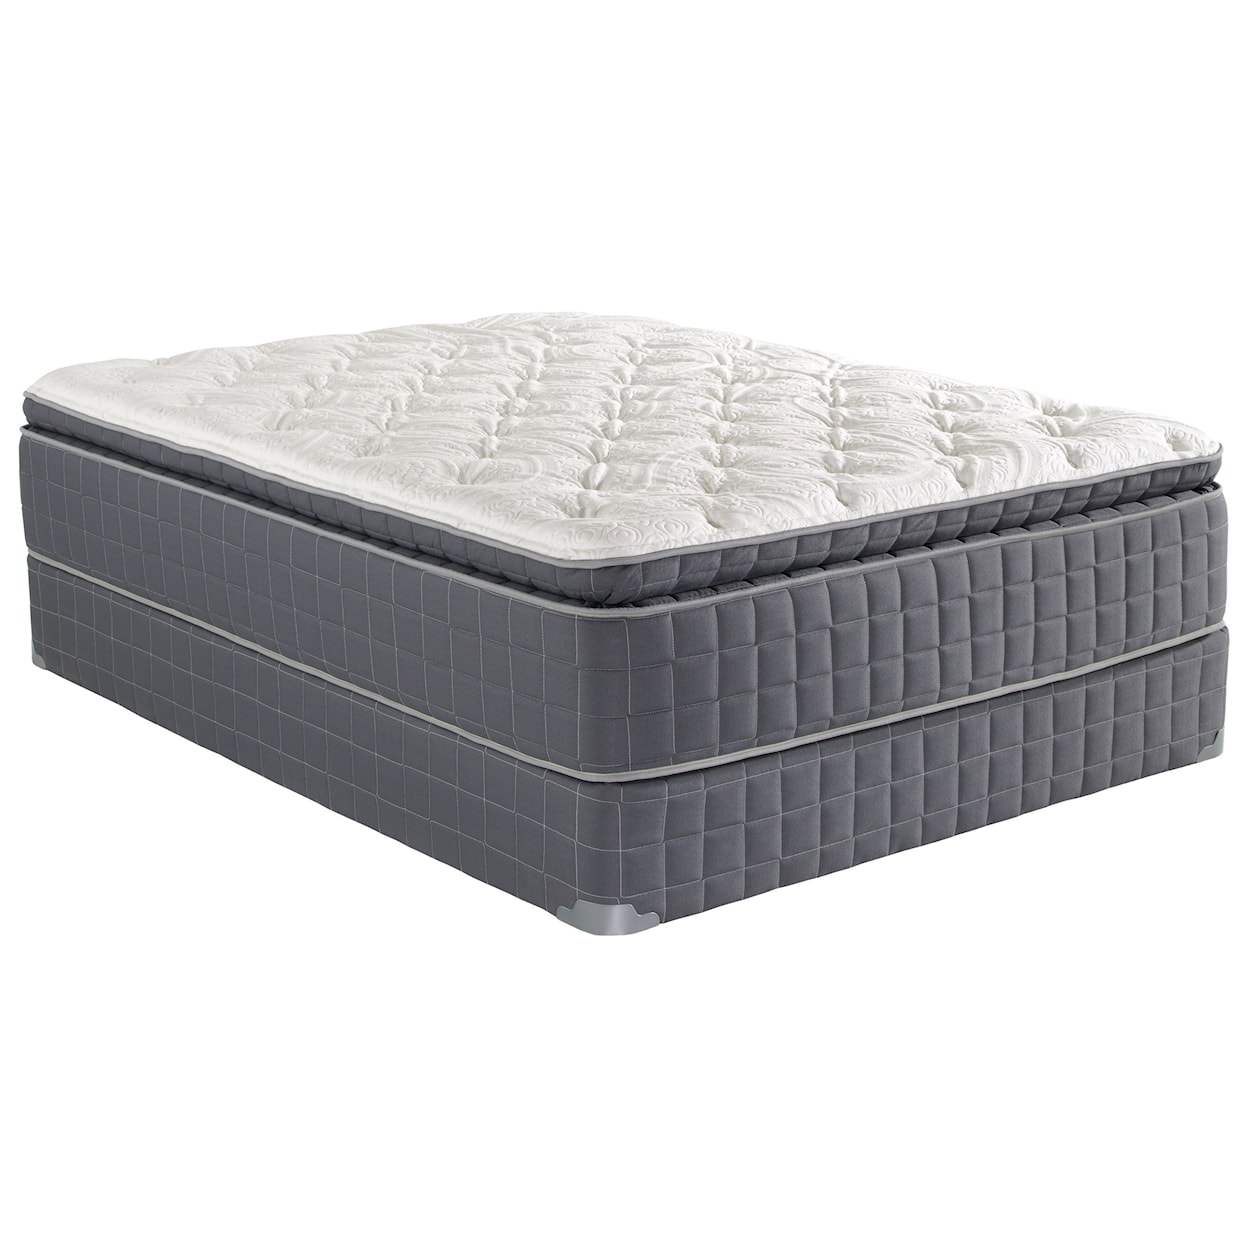 Spring Air Back Supporter XII Full 15" Coil on Coil PT Mattress Set